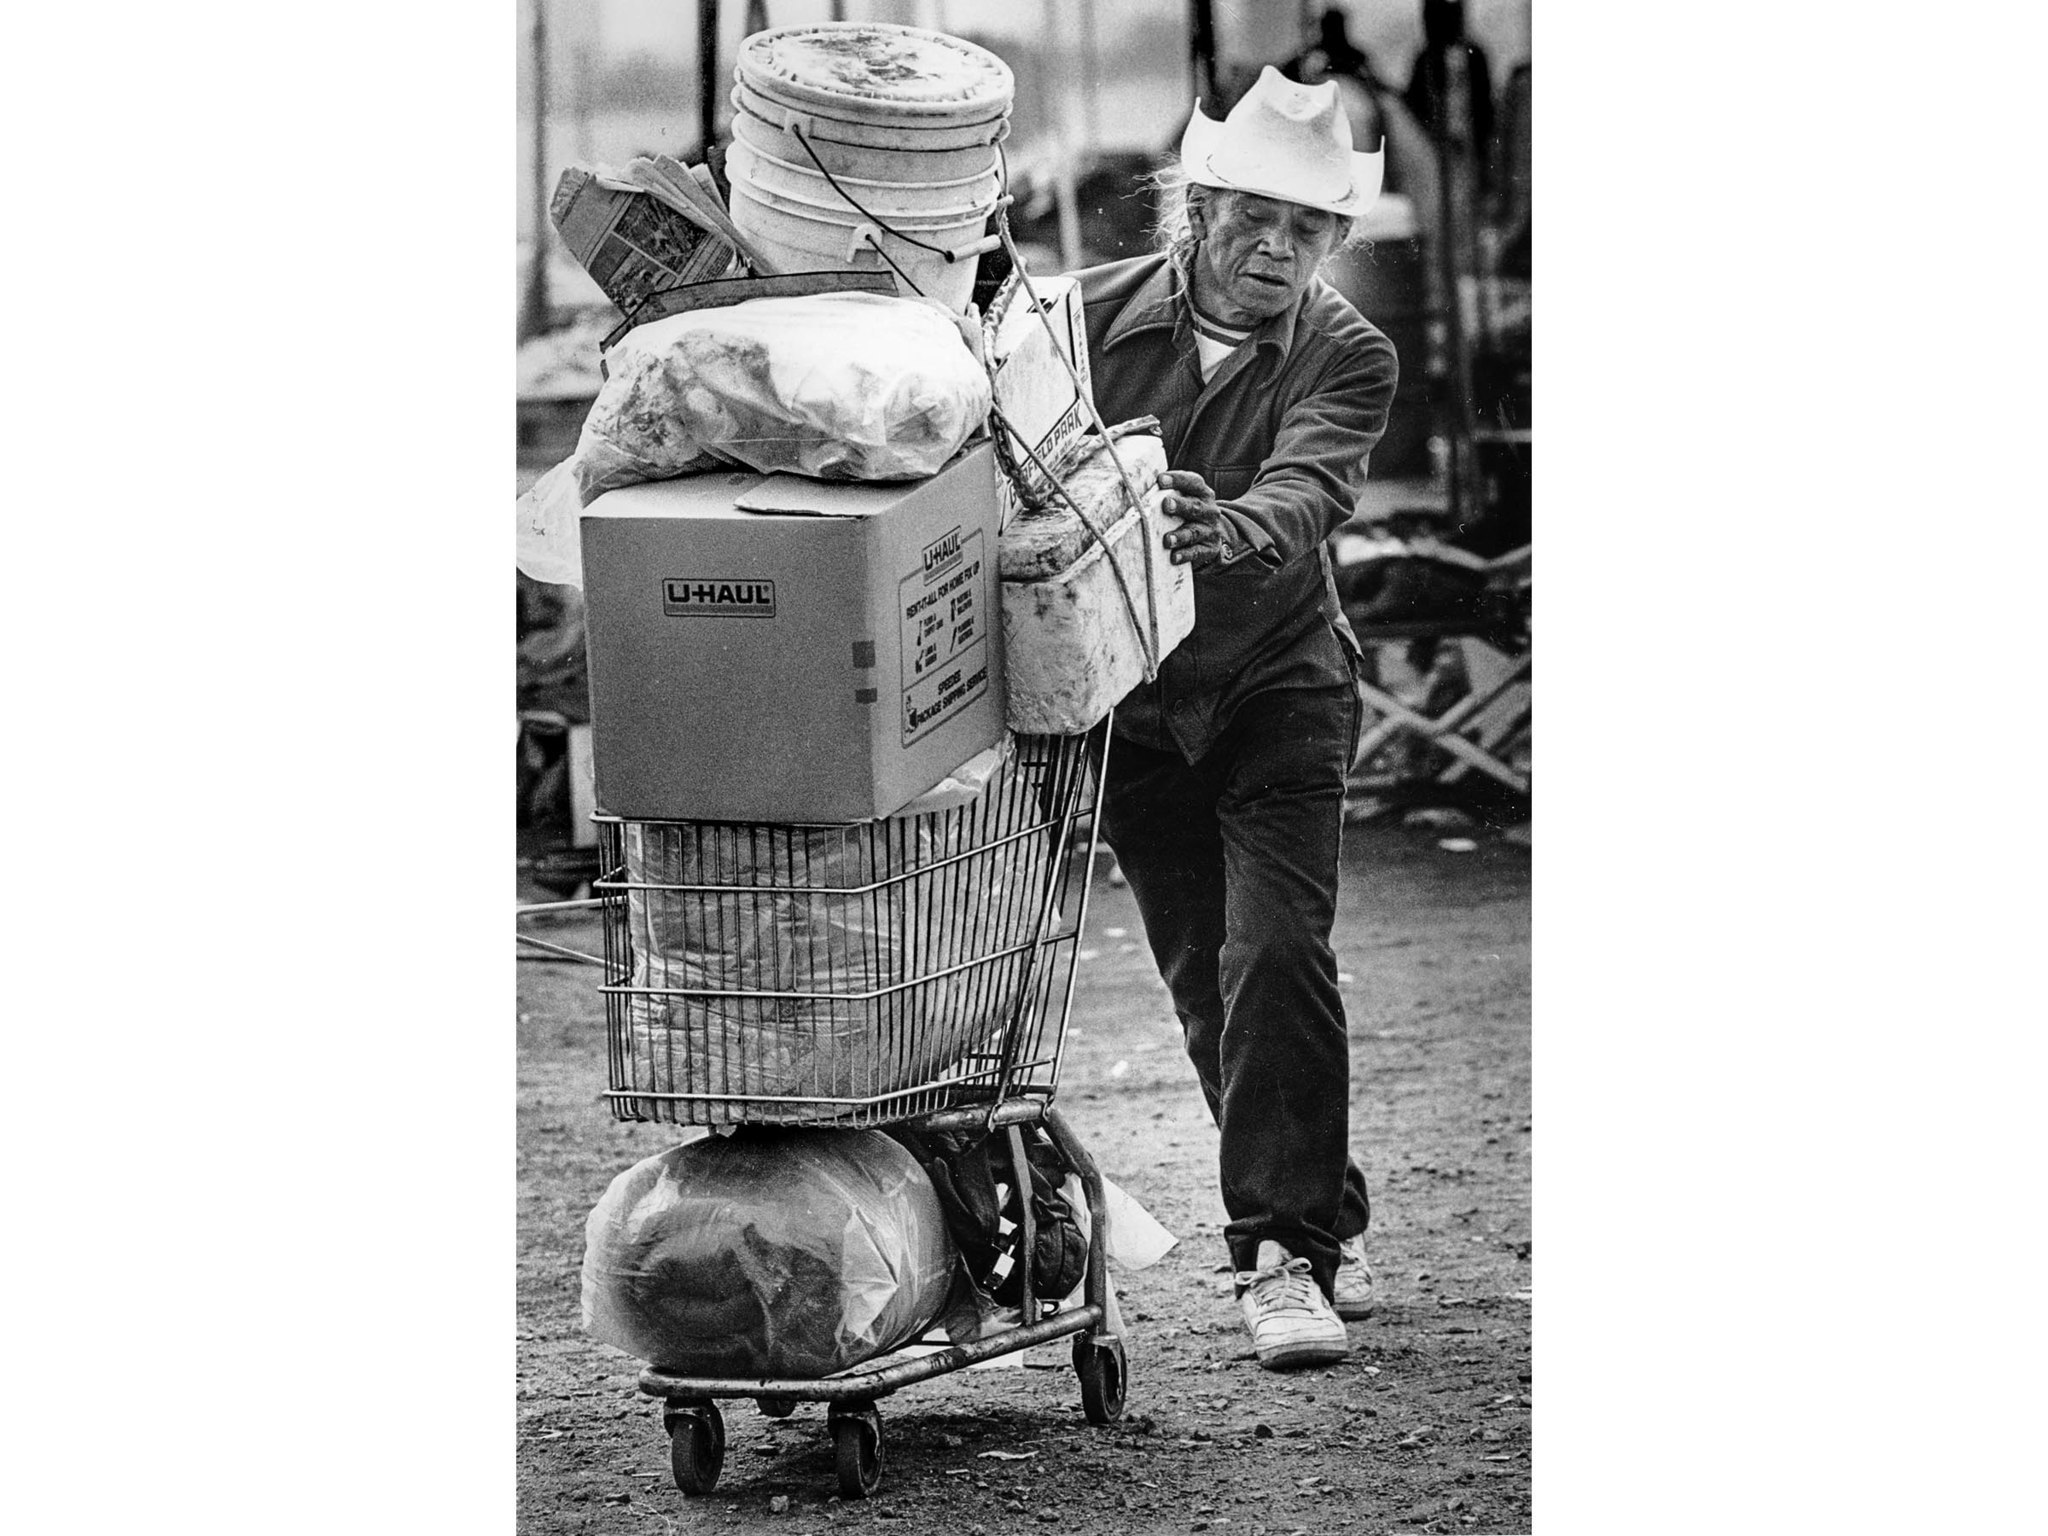 Sep. 25, 1987: With his belongings on a shopping cart, Alfred Gueva leaves the closed Urban Campgrou